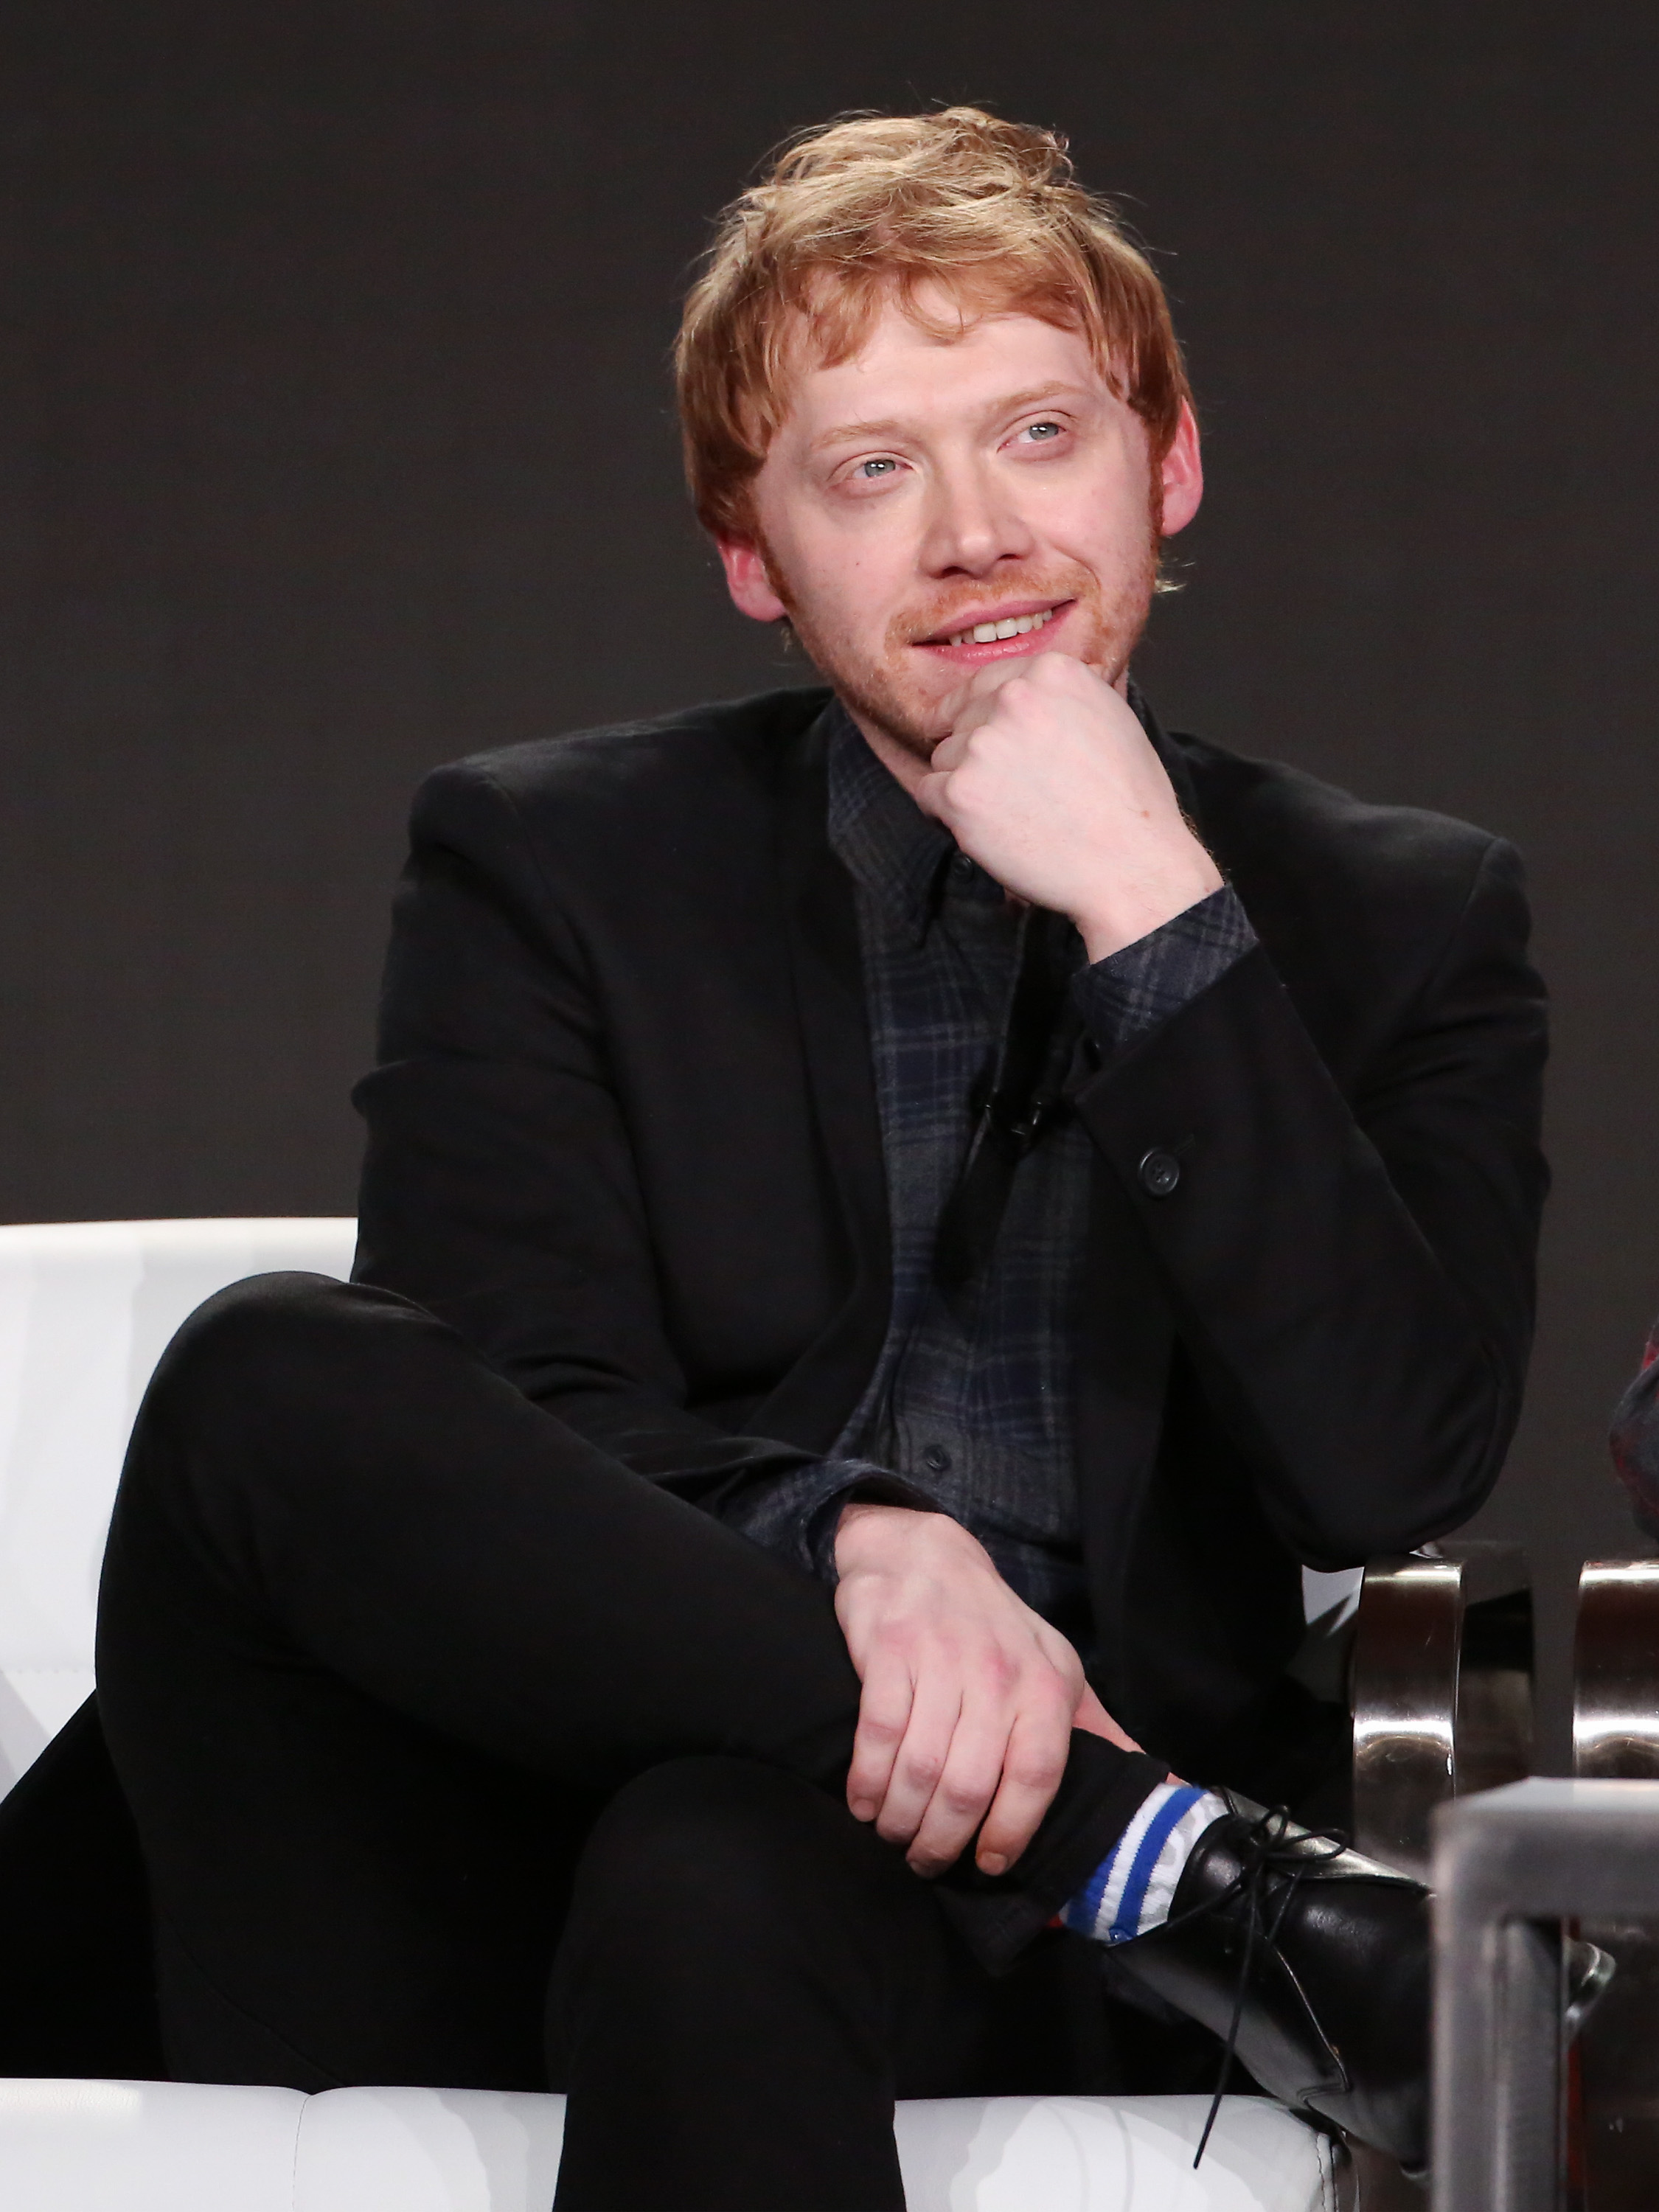 Rupert Grint at the TCA Winter Press Tour in Los Angeles, California on January 13, 2017 | Source: Getty Images